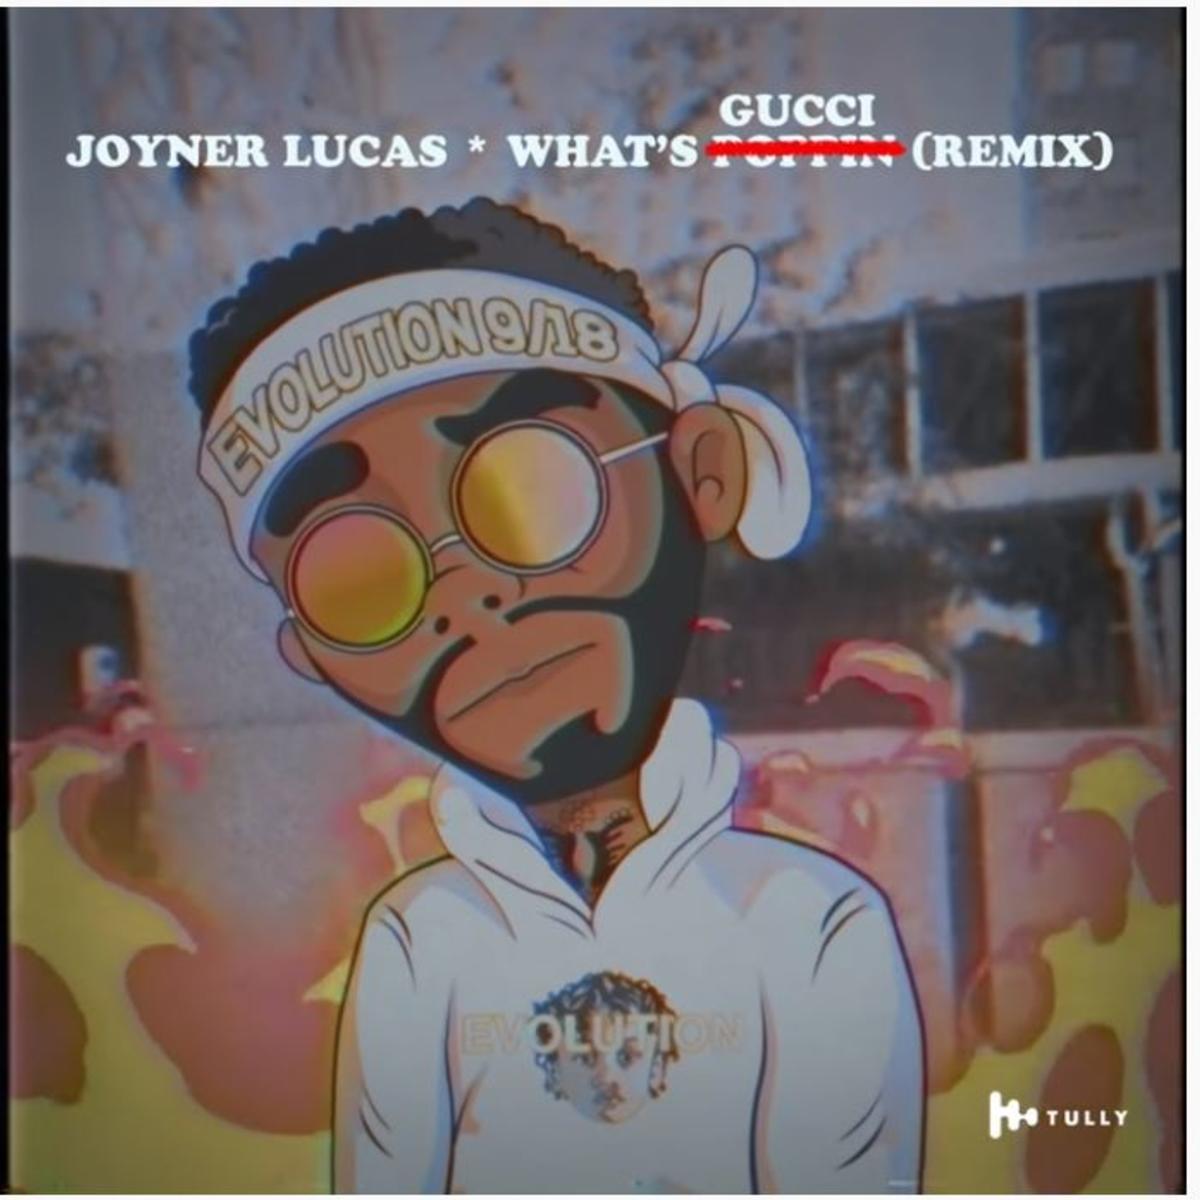 Joyner Lucas – “What’s Poppin Remix” (What’s Gucci) [Audio]